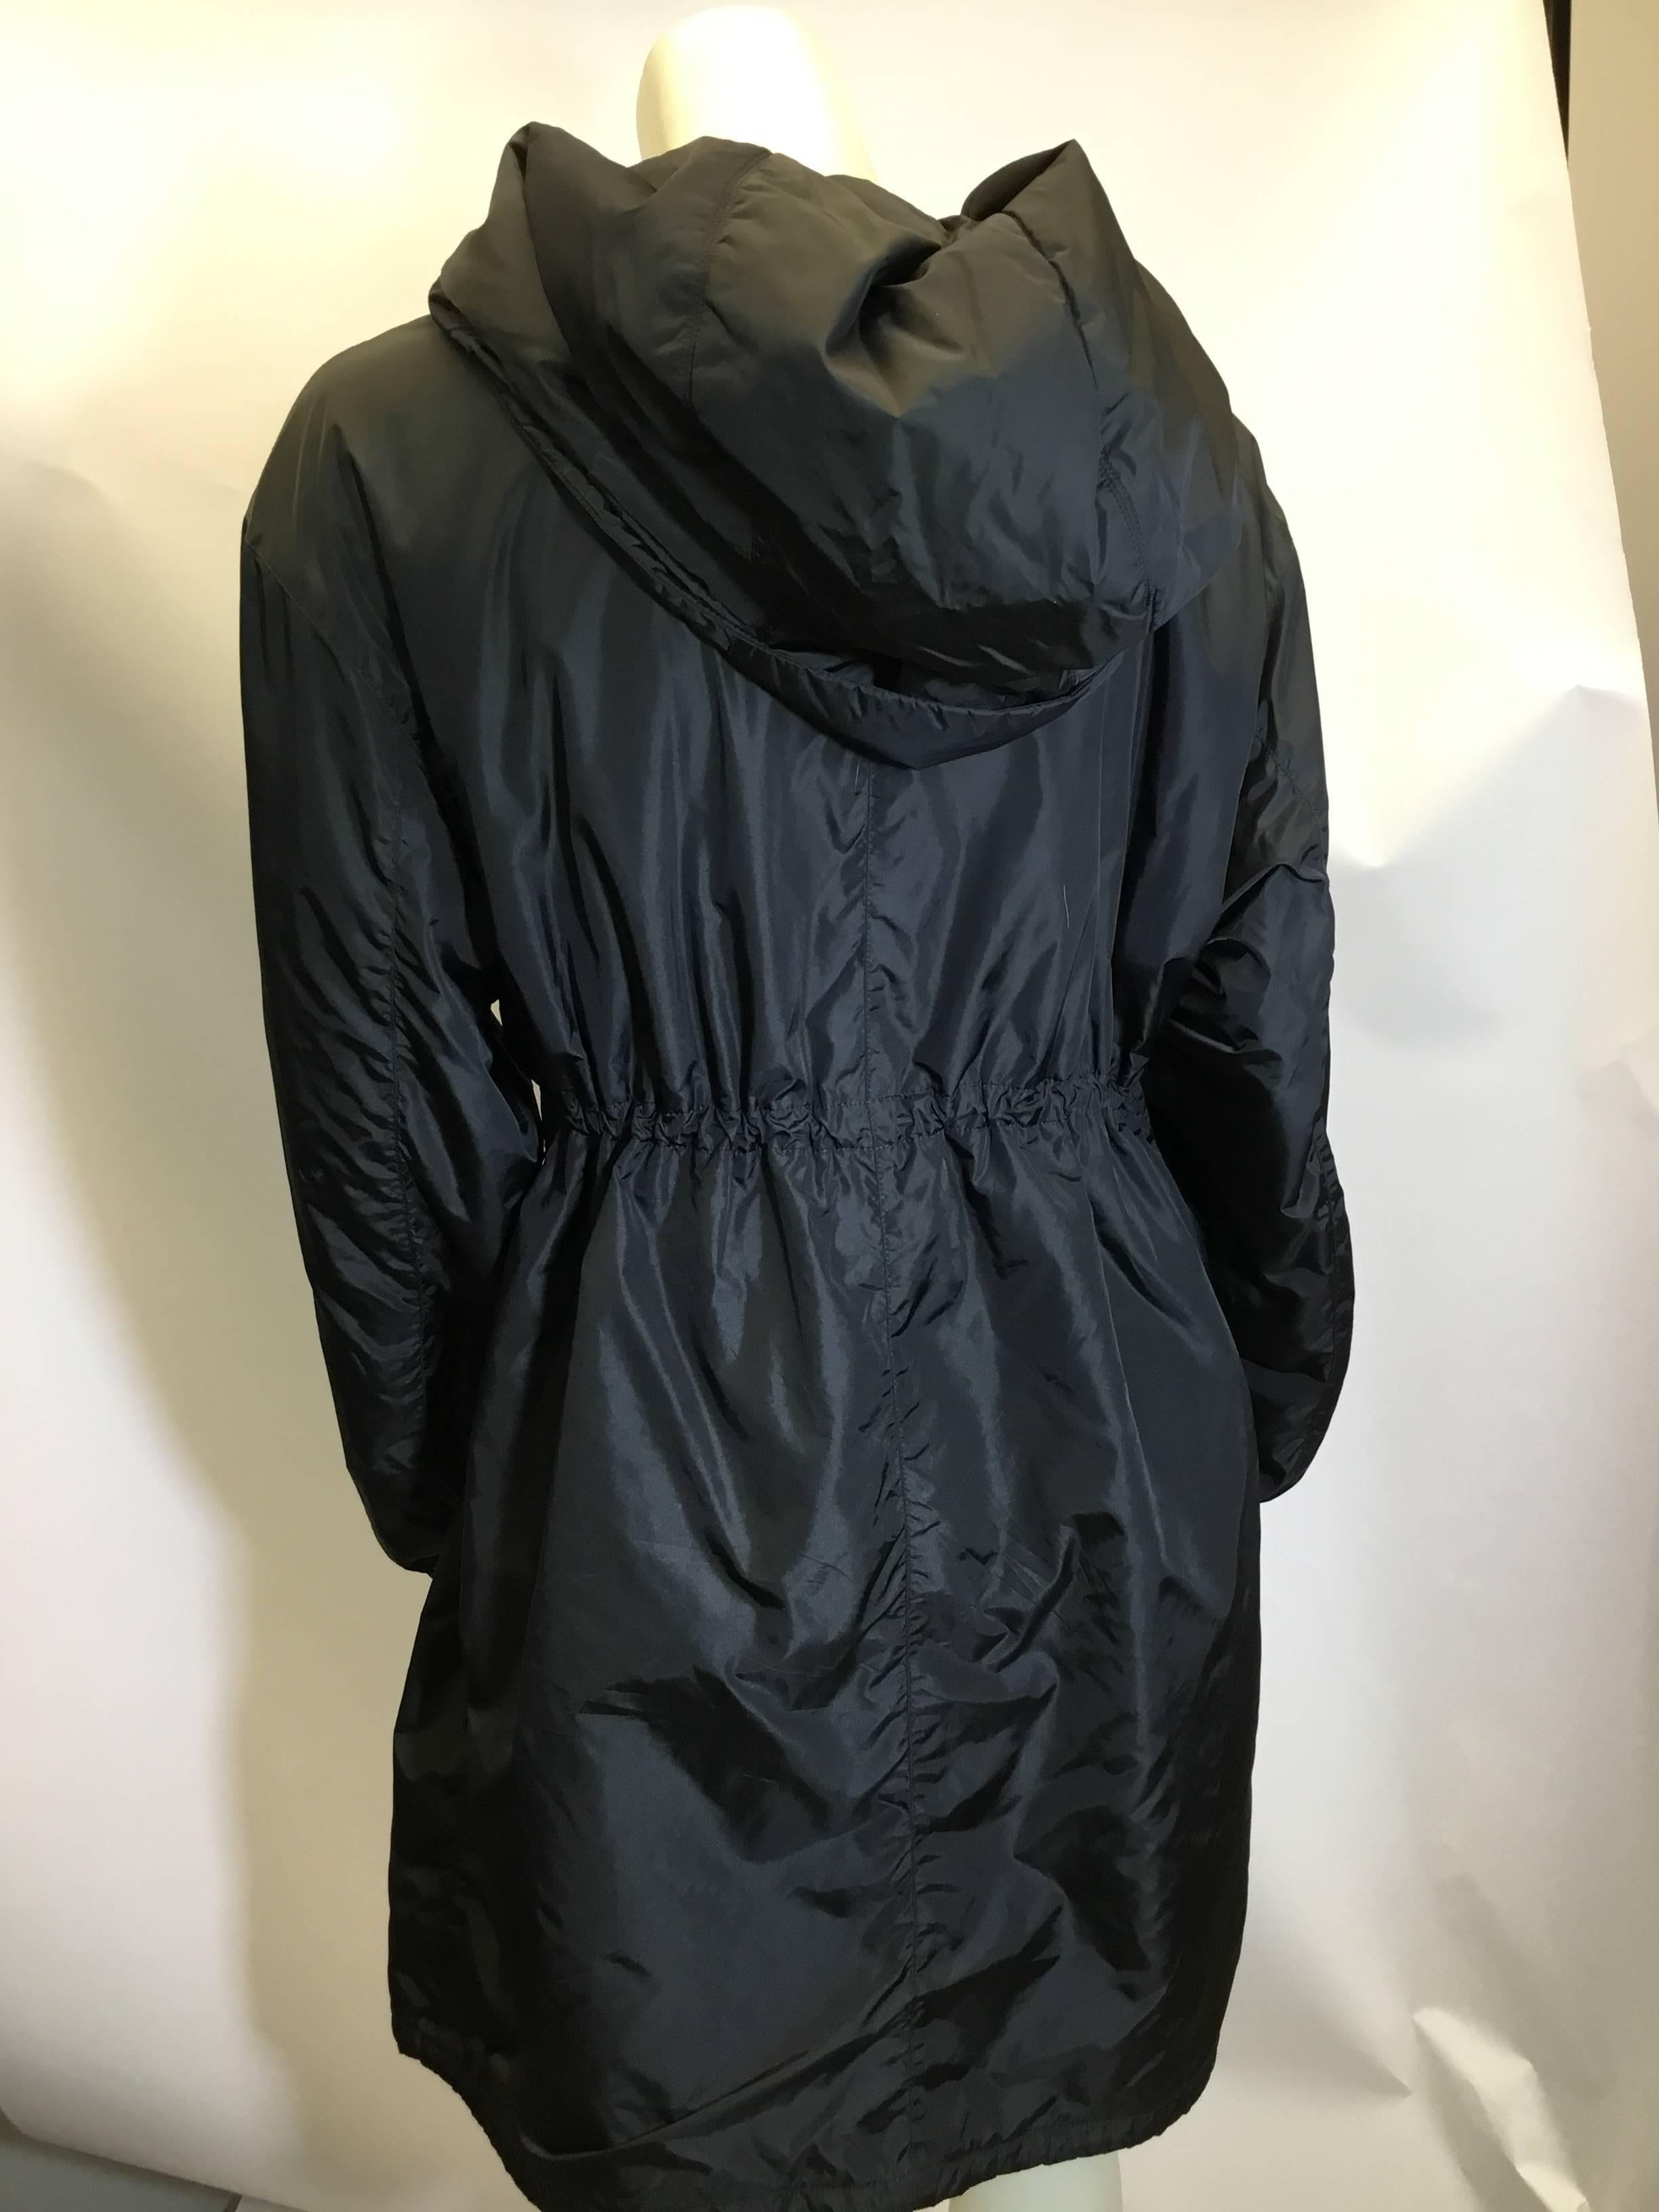 Prada Black Cinched Hooded Coat In Excellent Condition For Sale In Narberth, PA